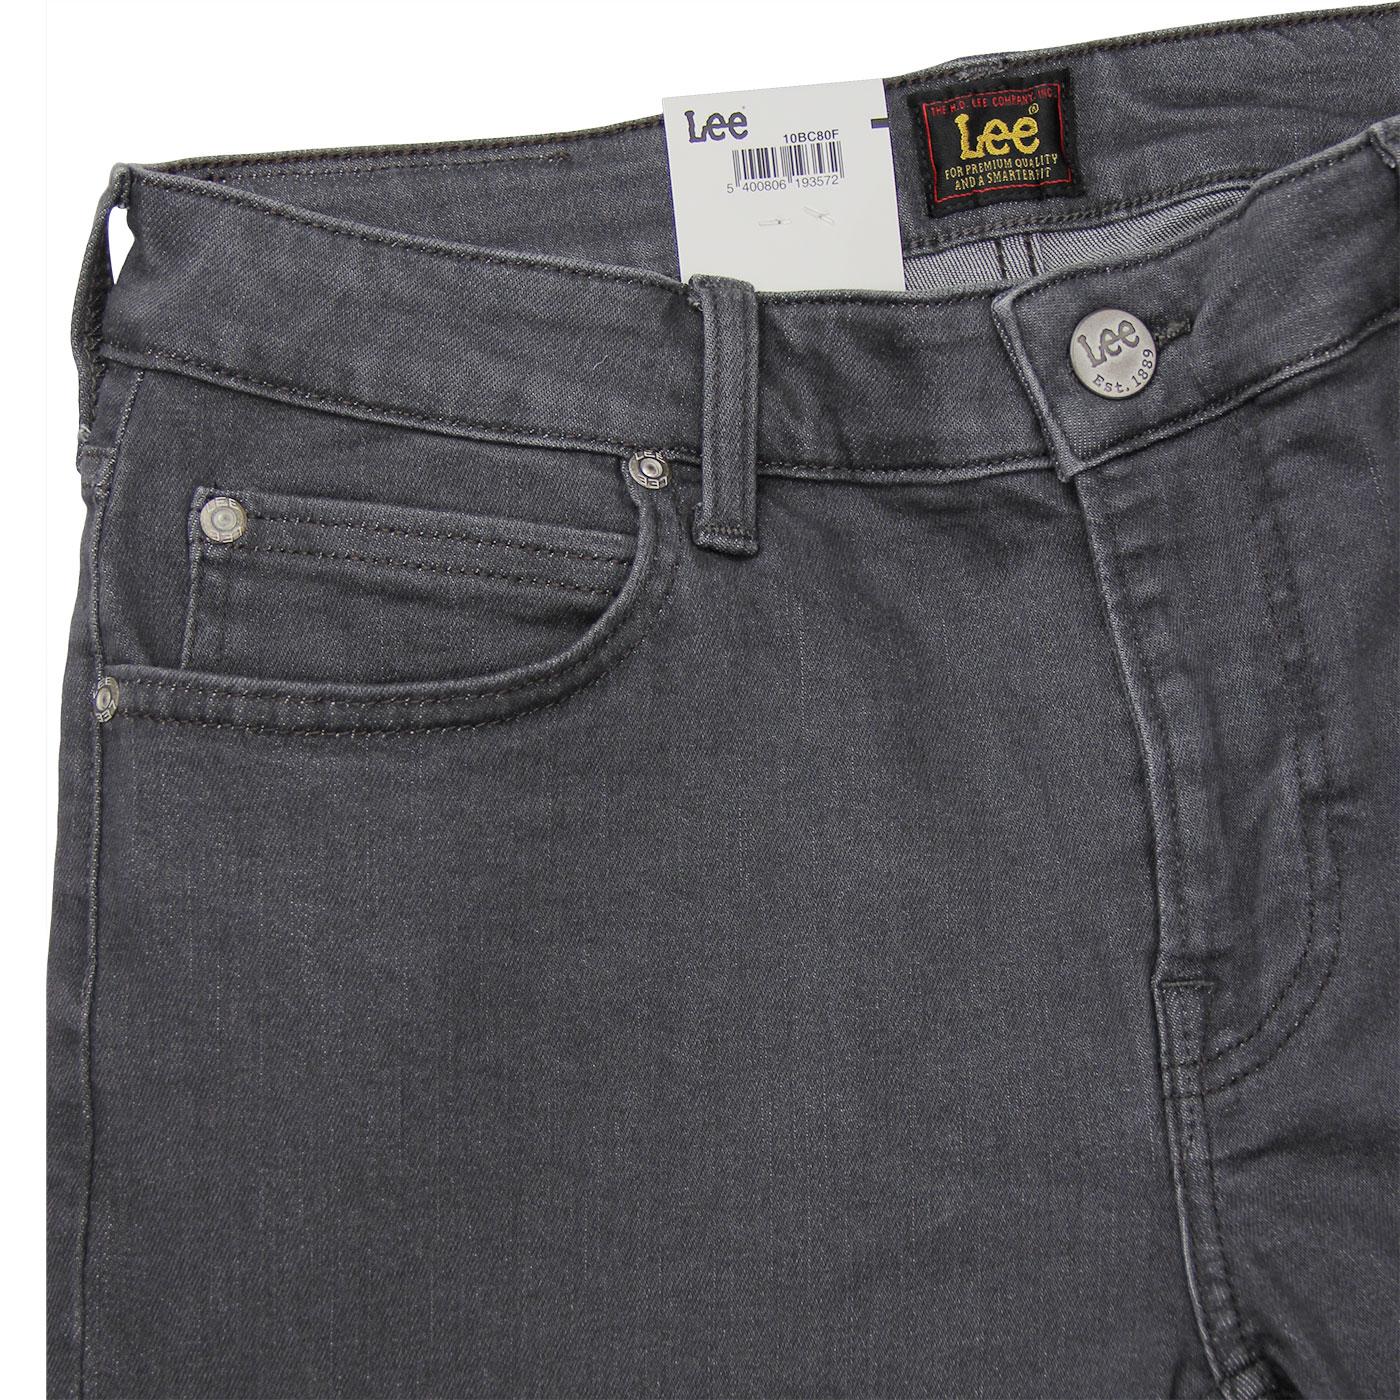 lee gray jeans